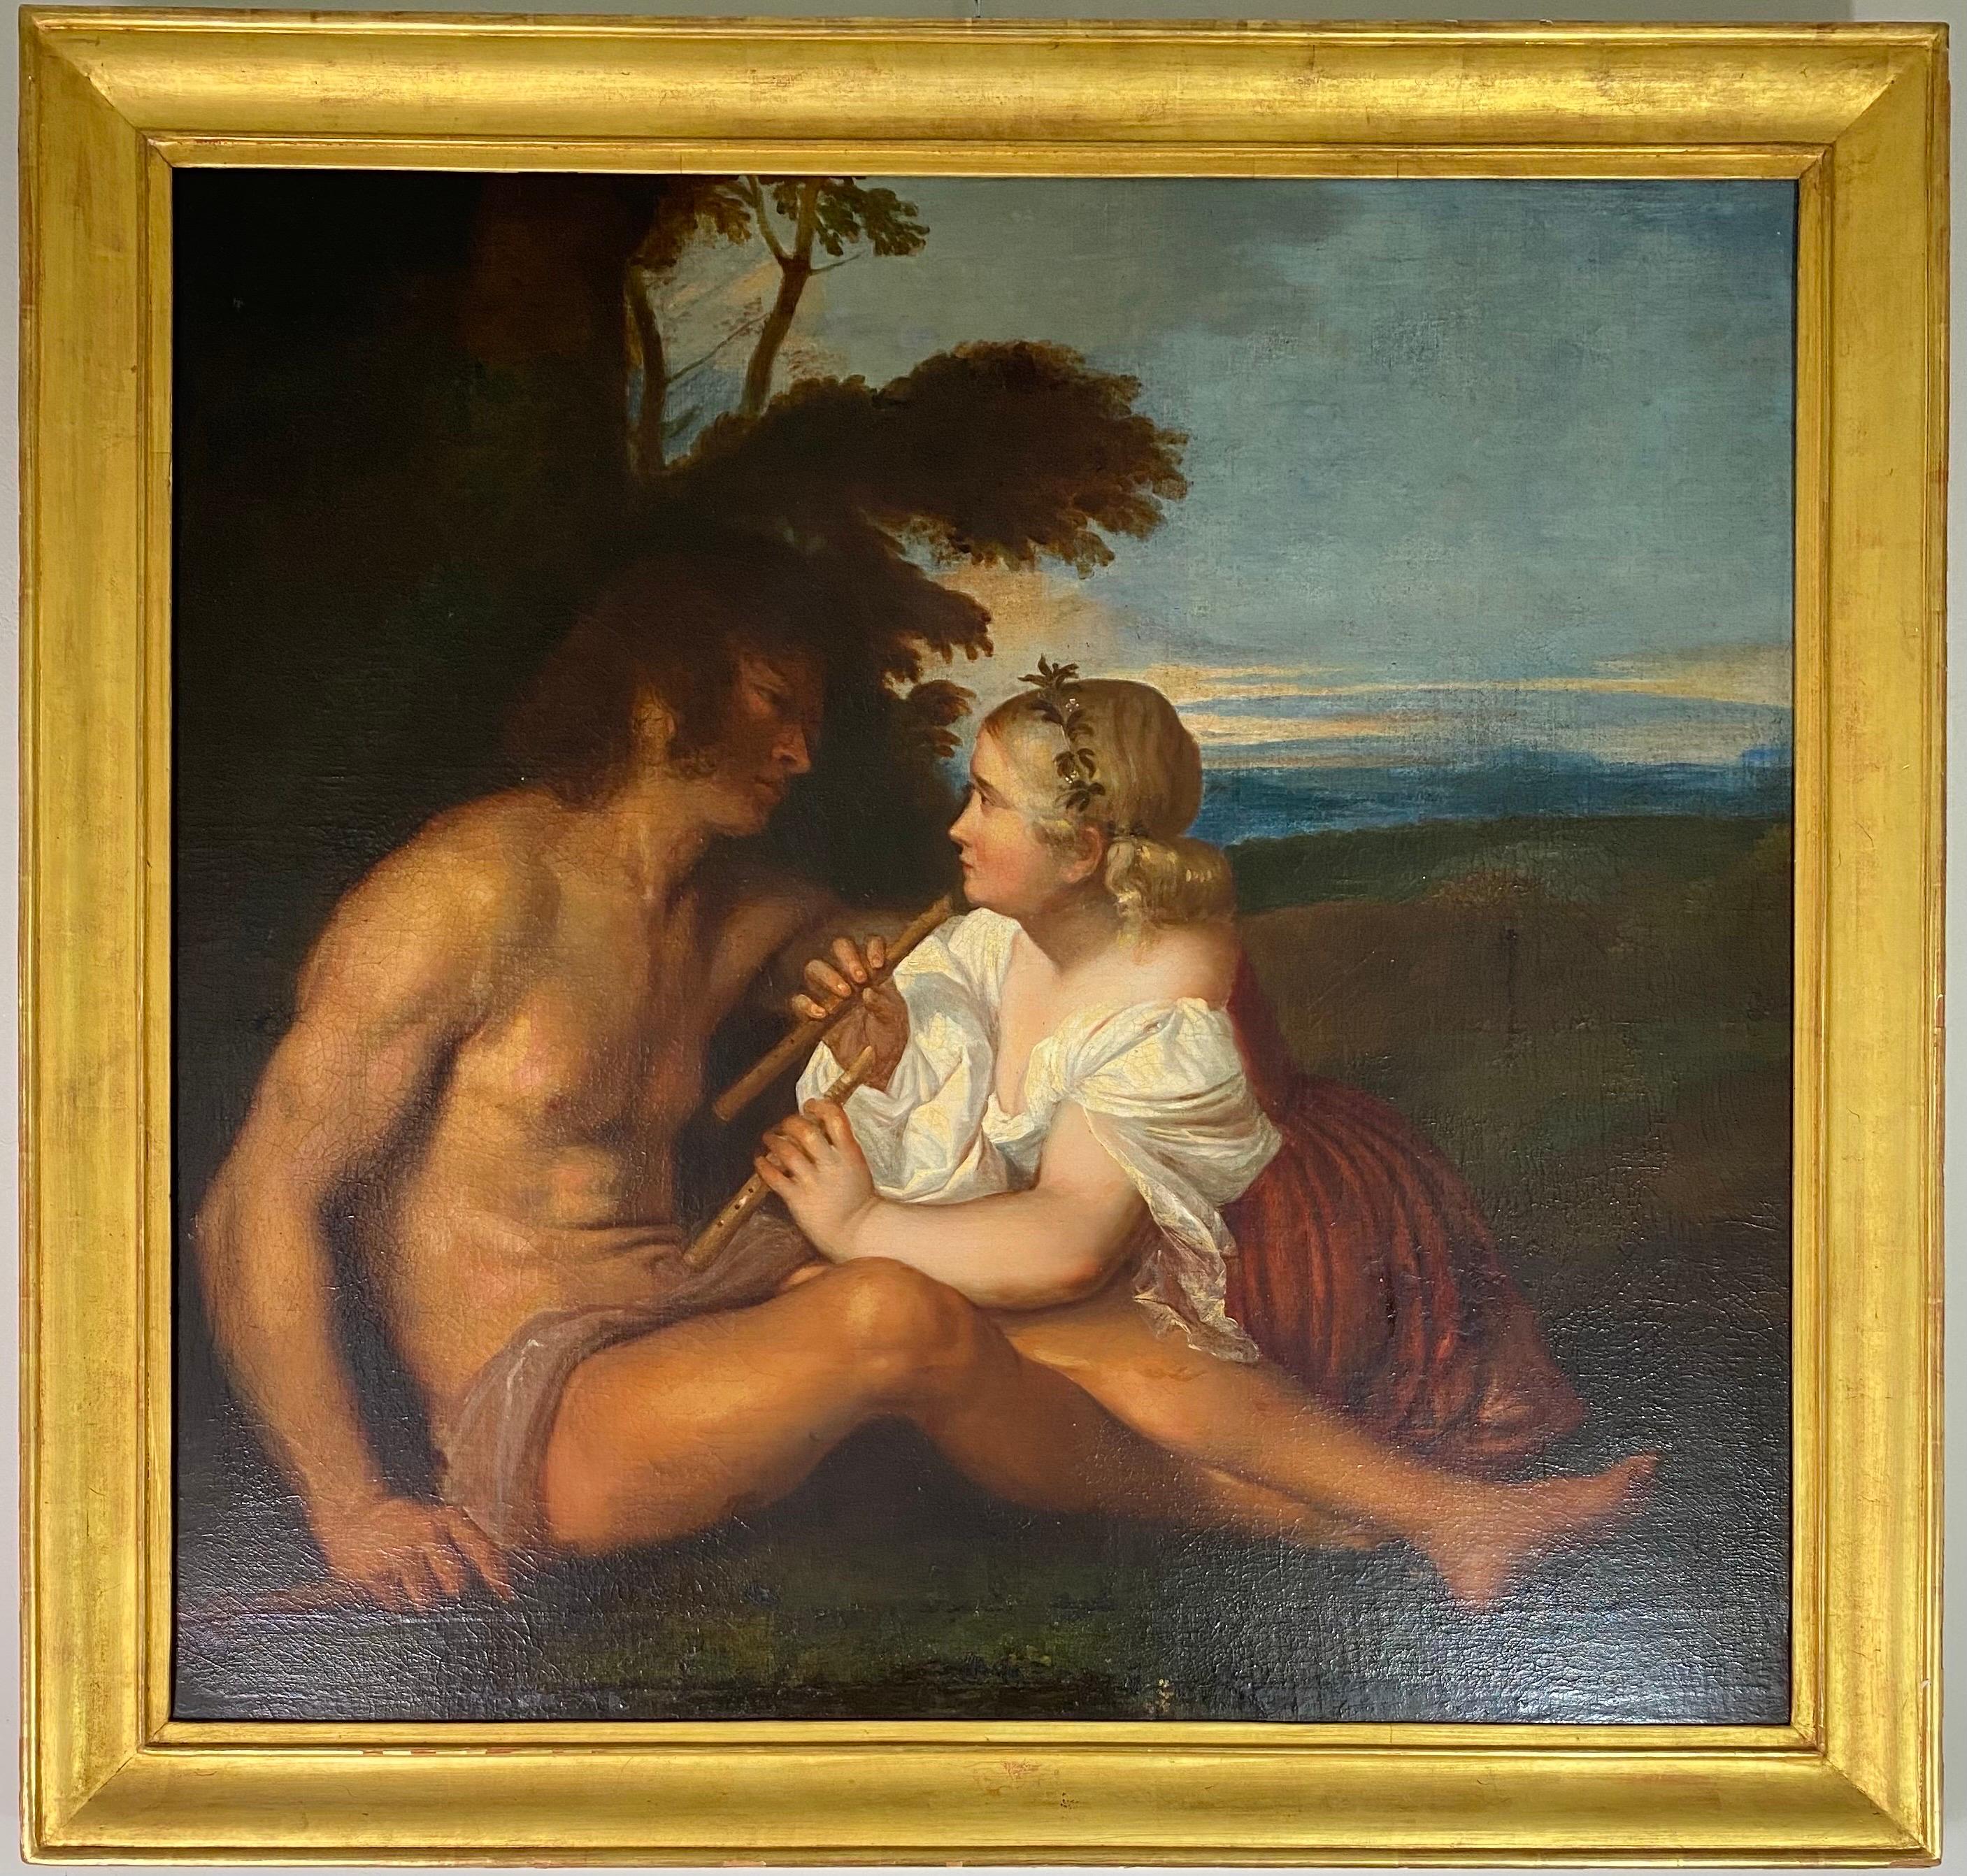 This very beautiful oil on canvas is a reworking of the left part of the painting The Three Ages of Man